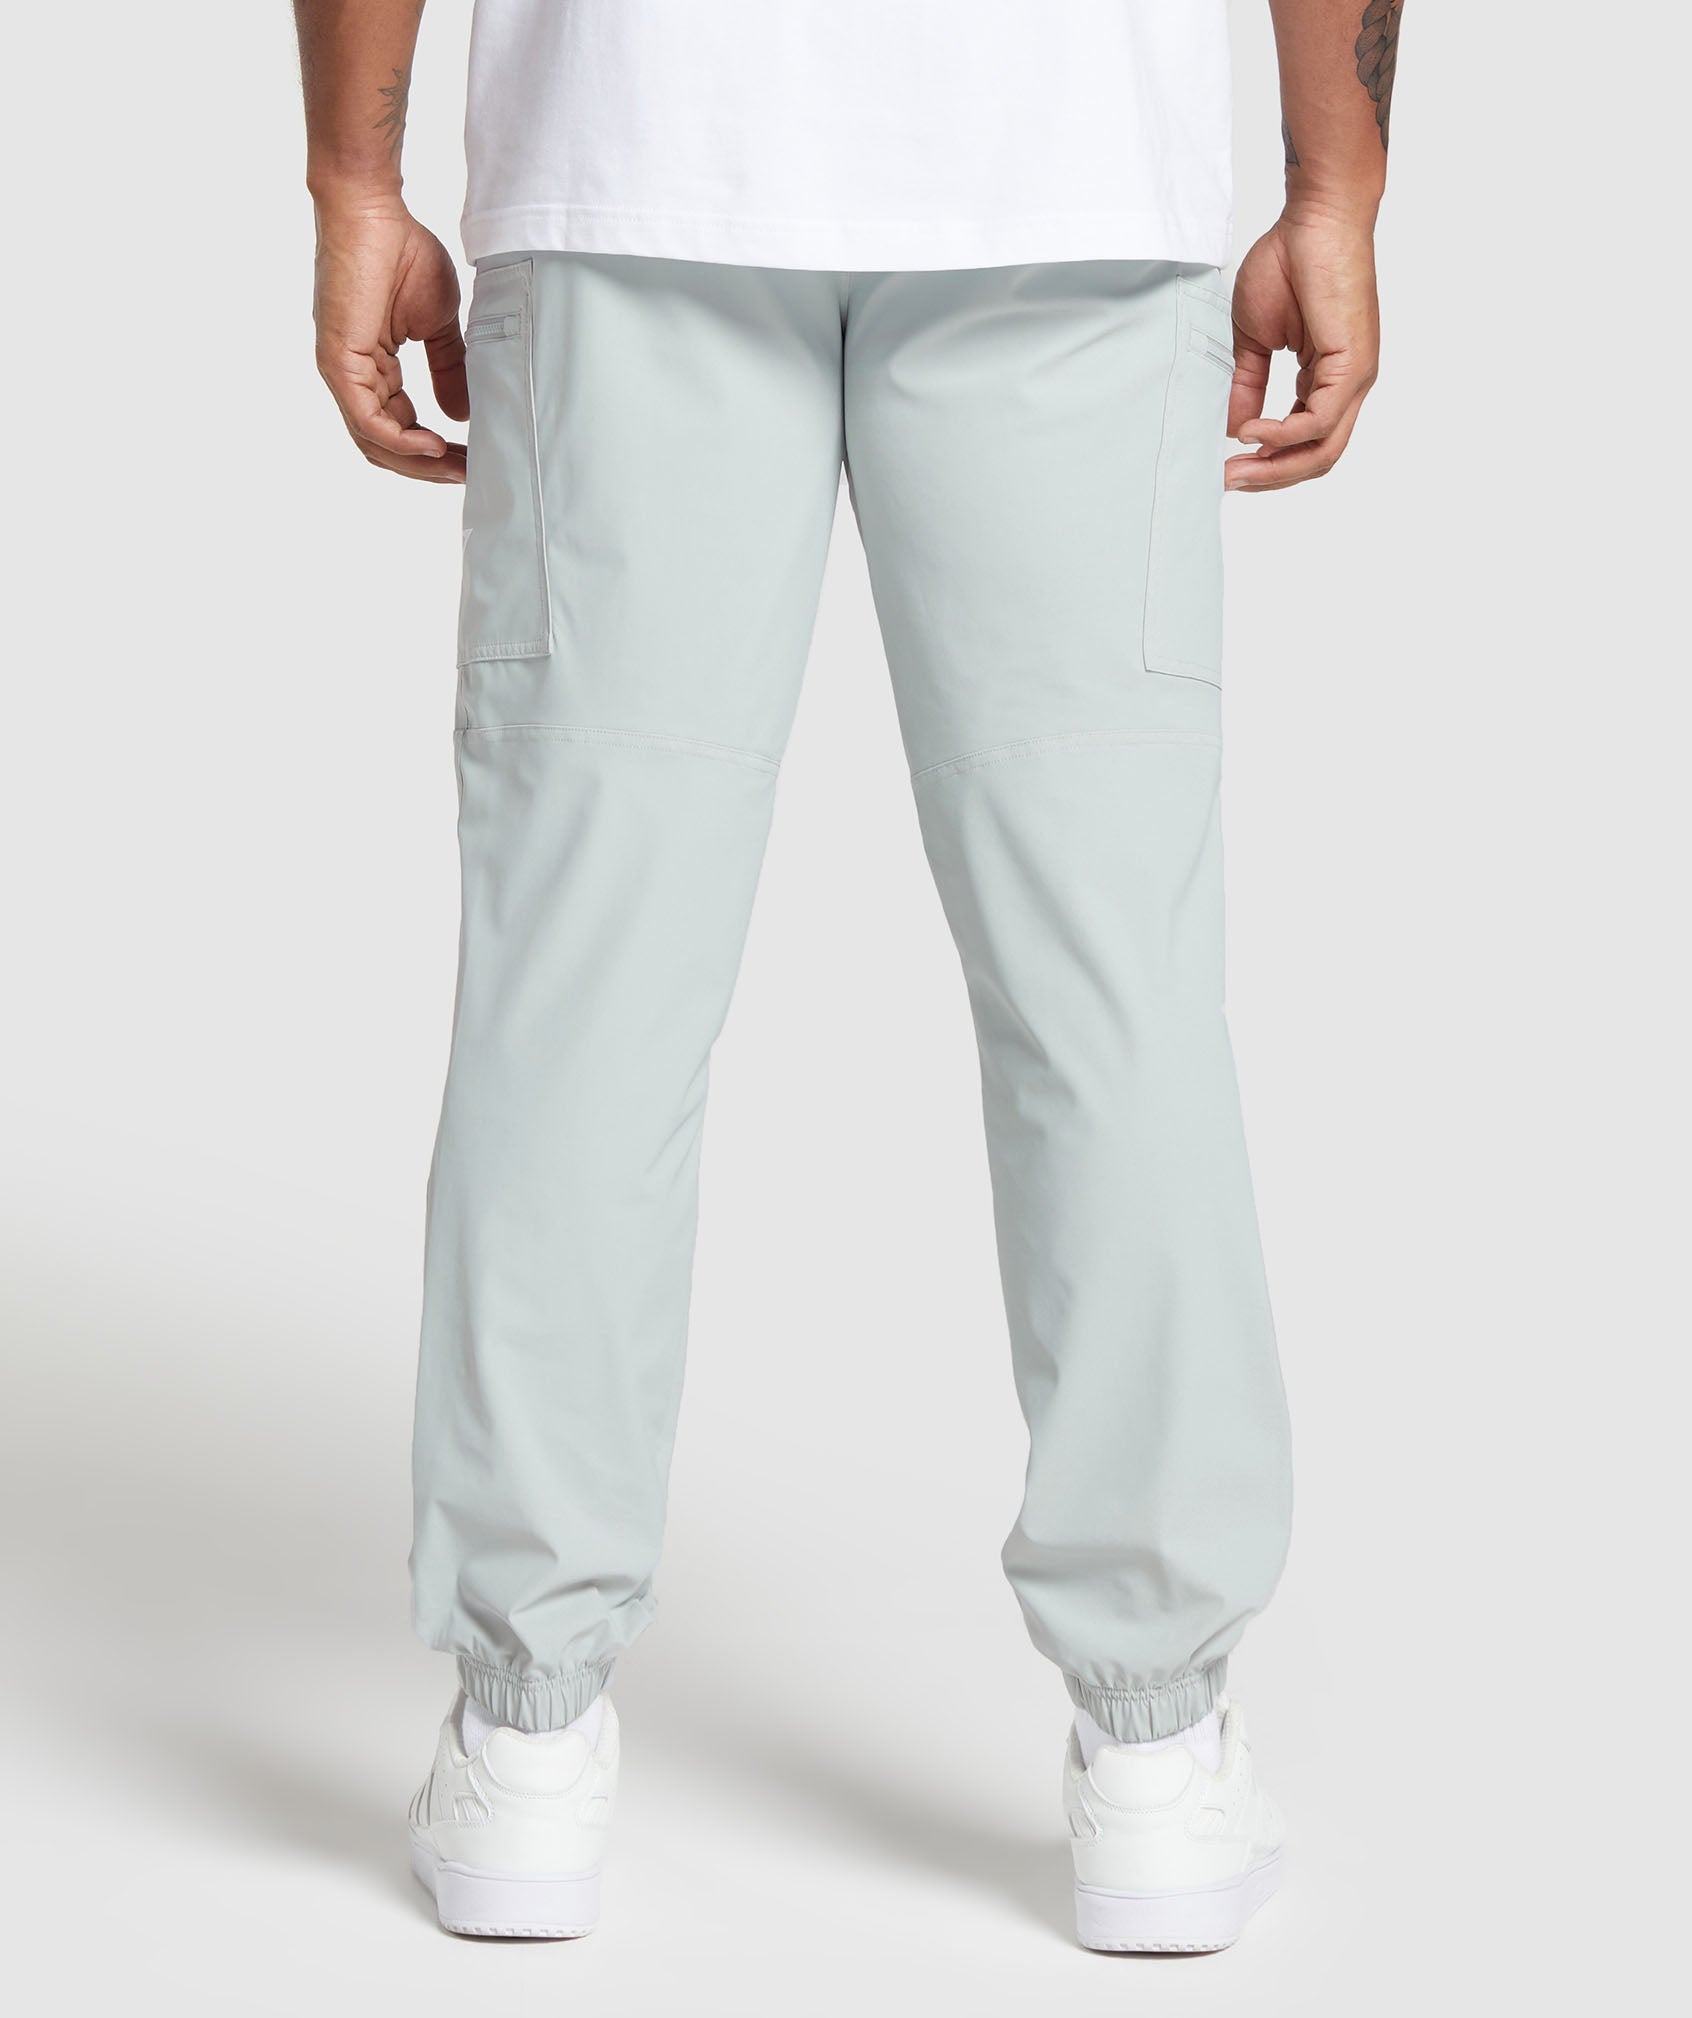 Rest Day Cargo Pants in Light Grey - view 3